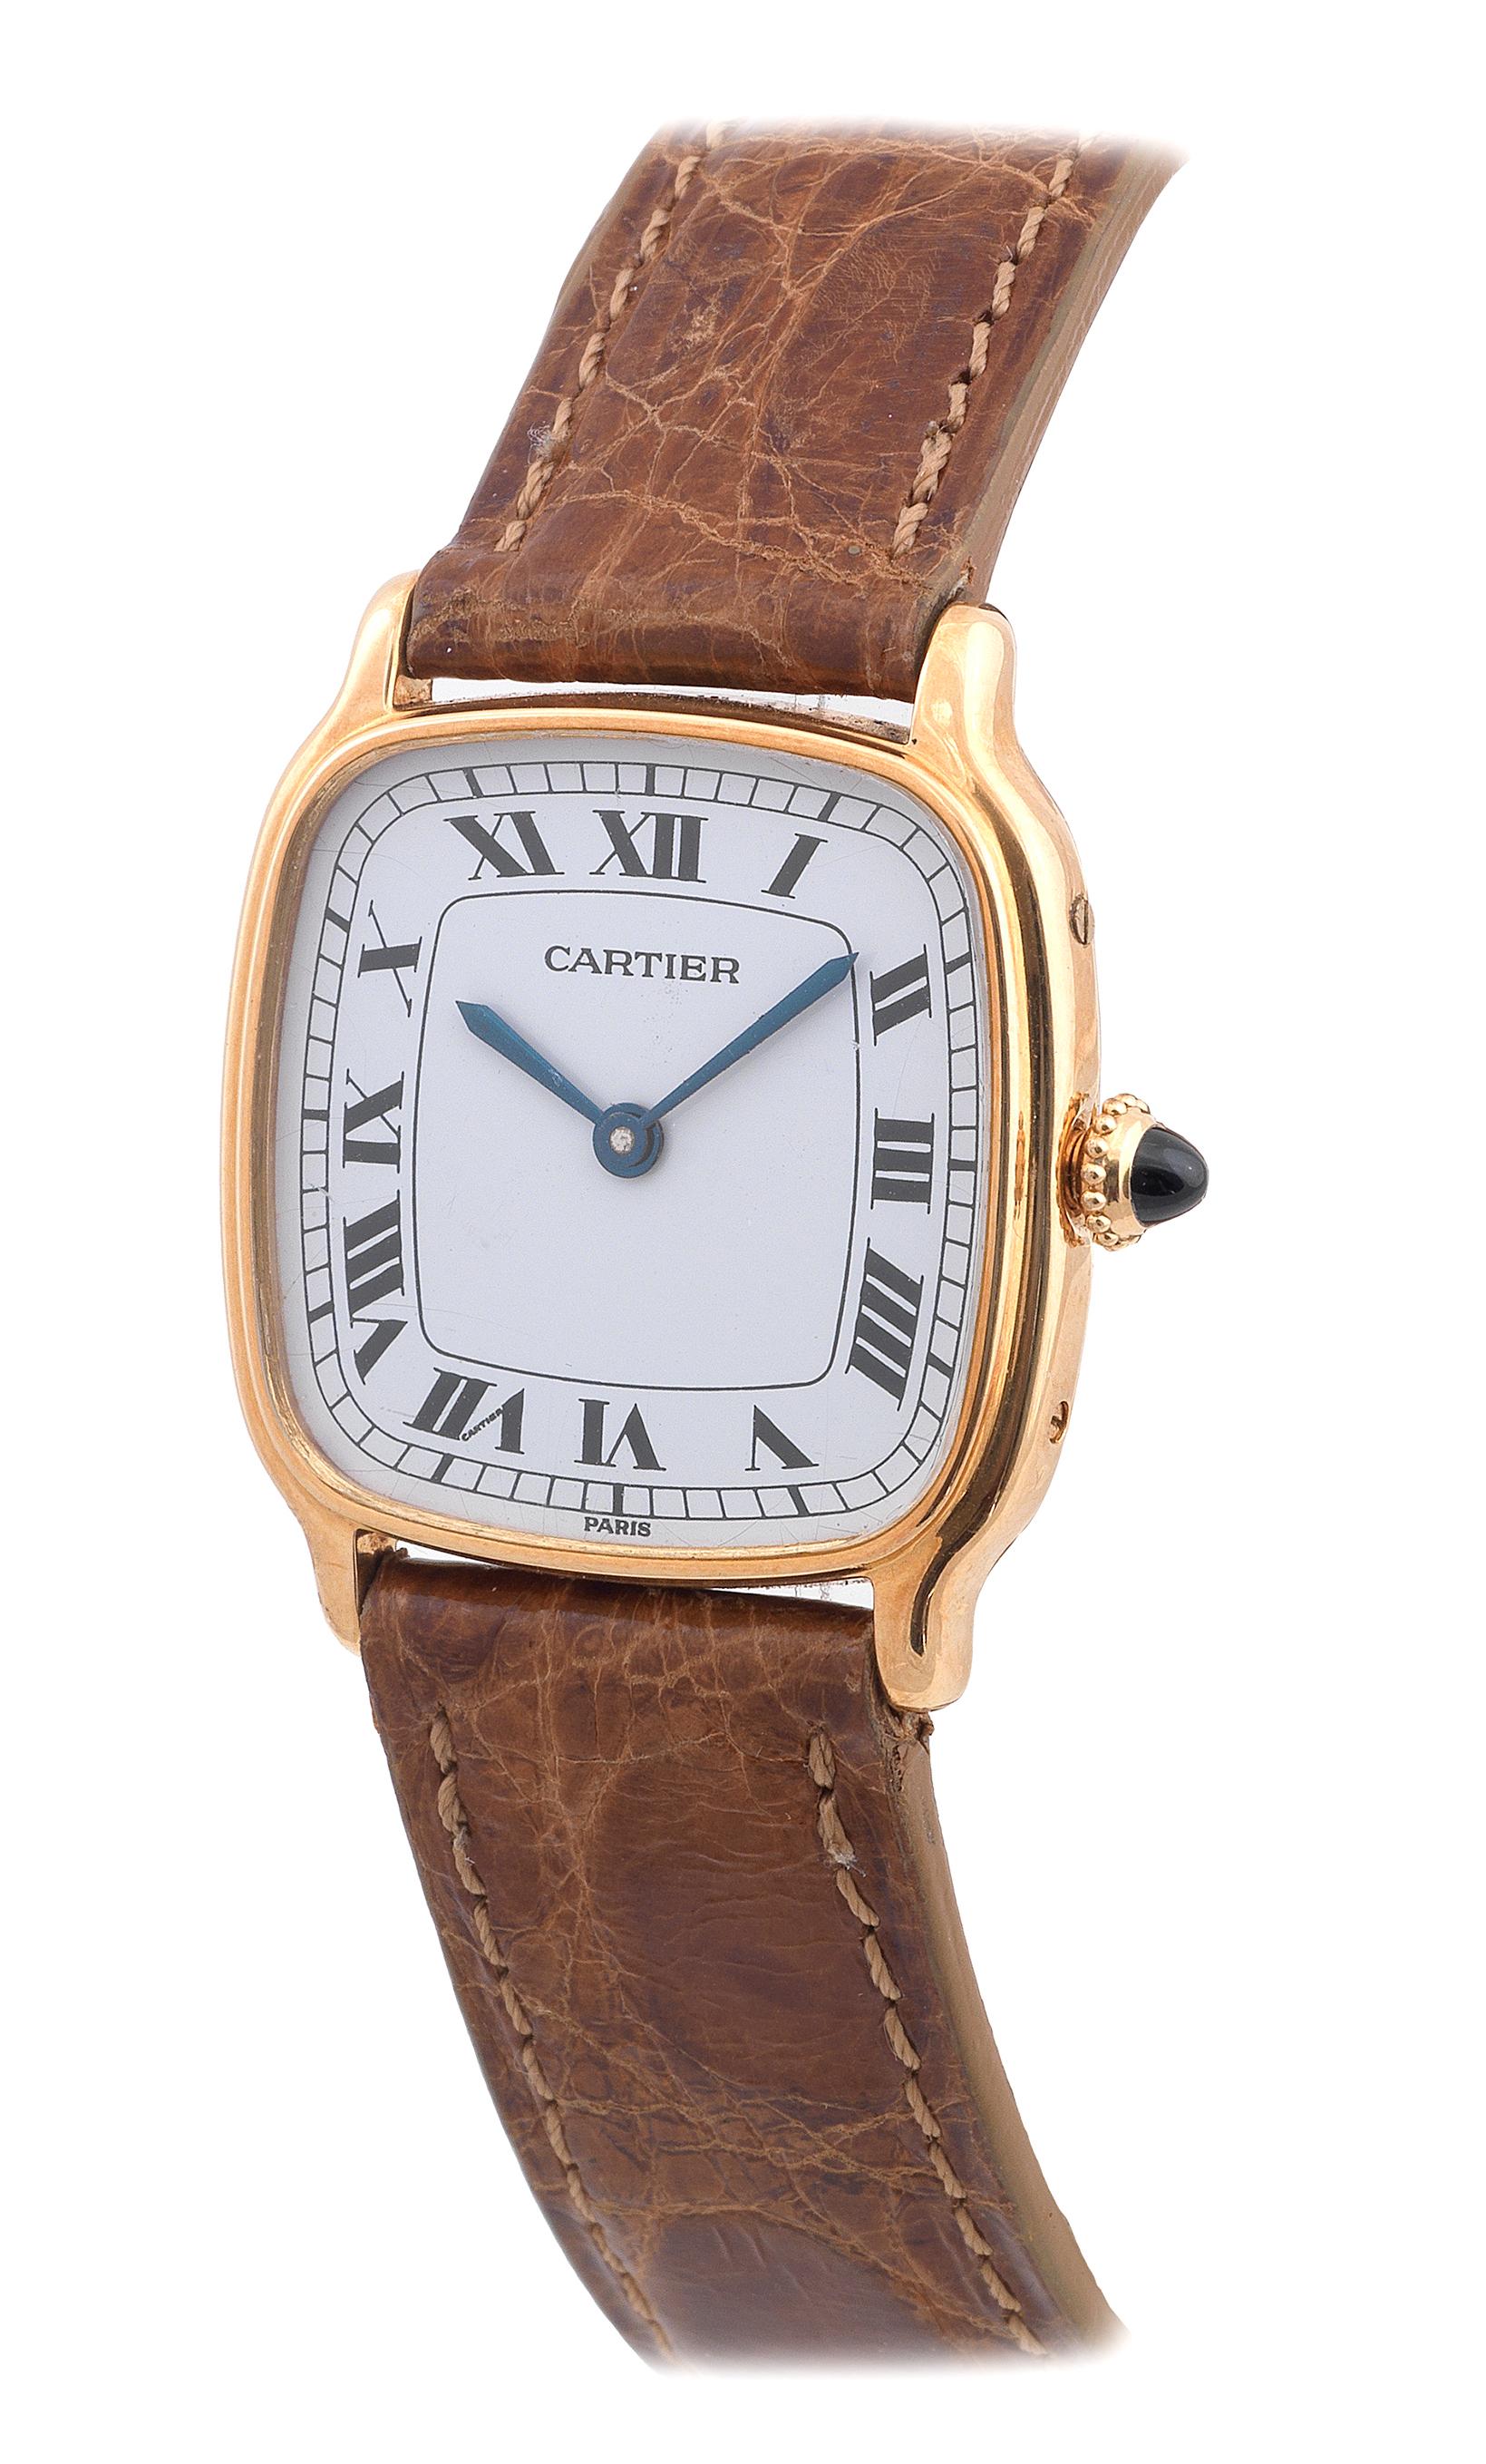 No. 107150442. Made in the 1990's. Fine, tonneau-shaped, 18K yellow gold wristwatch.
Case two-body, solid, polished, screws on the band to secure the case back, cabochon sapphire-set winding crown, sapphire crystal. Dial white with painted radial